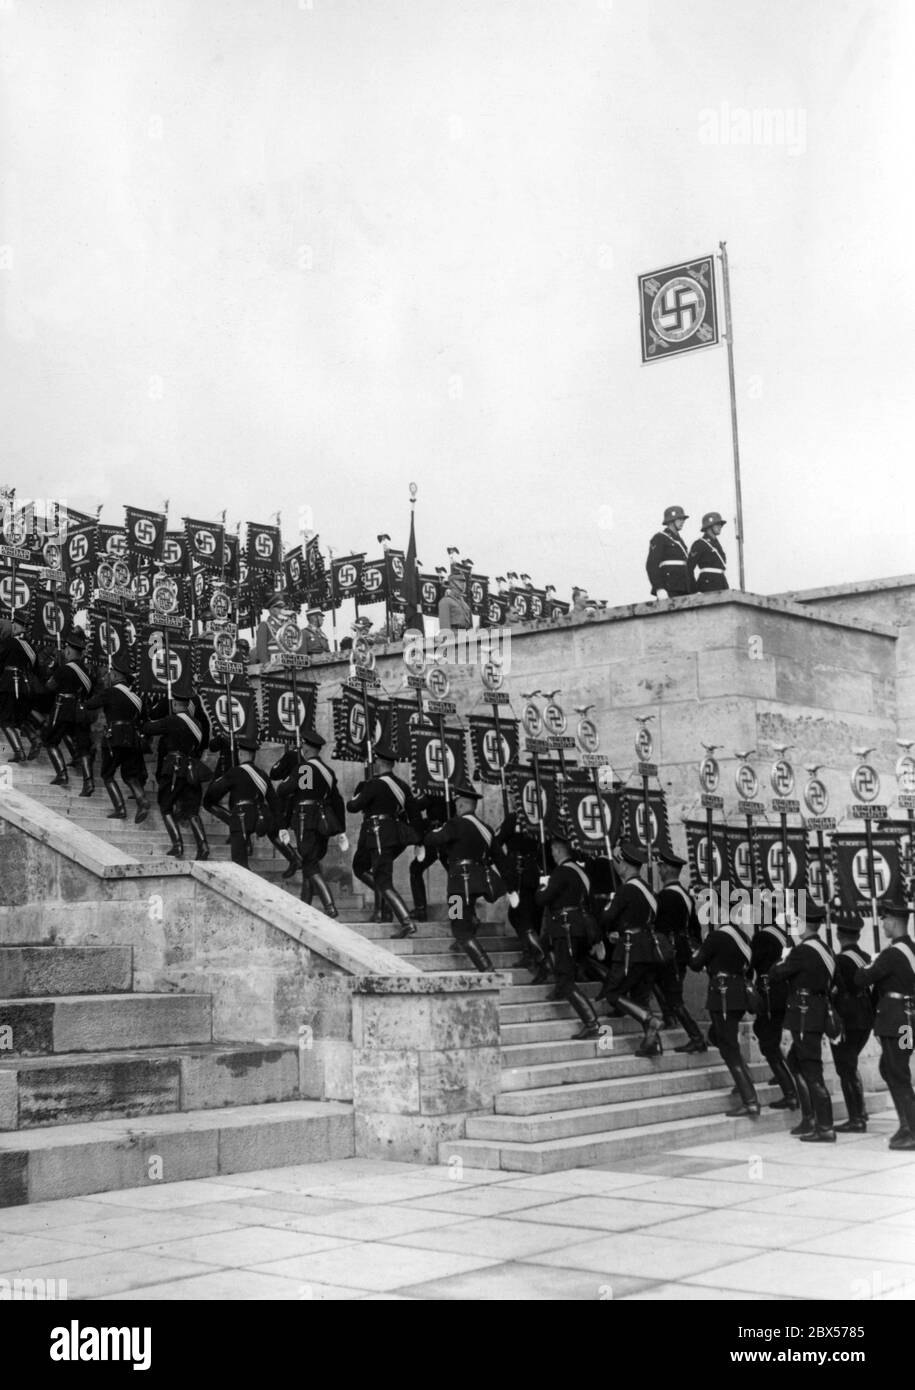 During the Reich Party Congress of Labour, a grand roll call is held in Nuremberg's Luitpold Arena on the Reich Party Rally Grounds, where the standard bearers of the SS march up the rostrum. Stock Photo